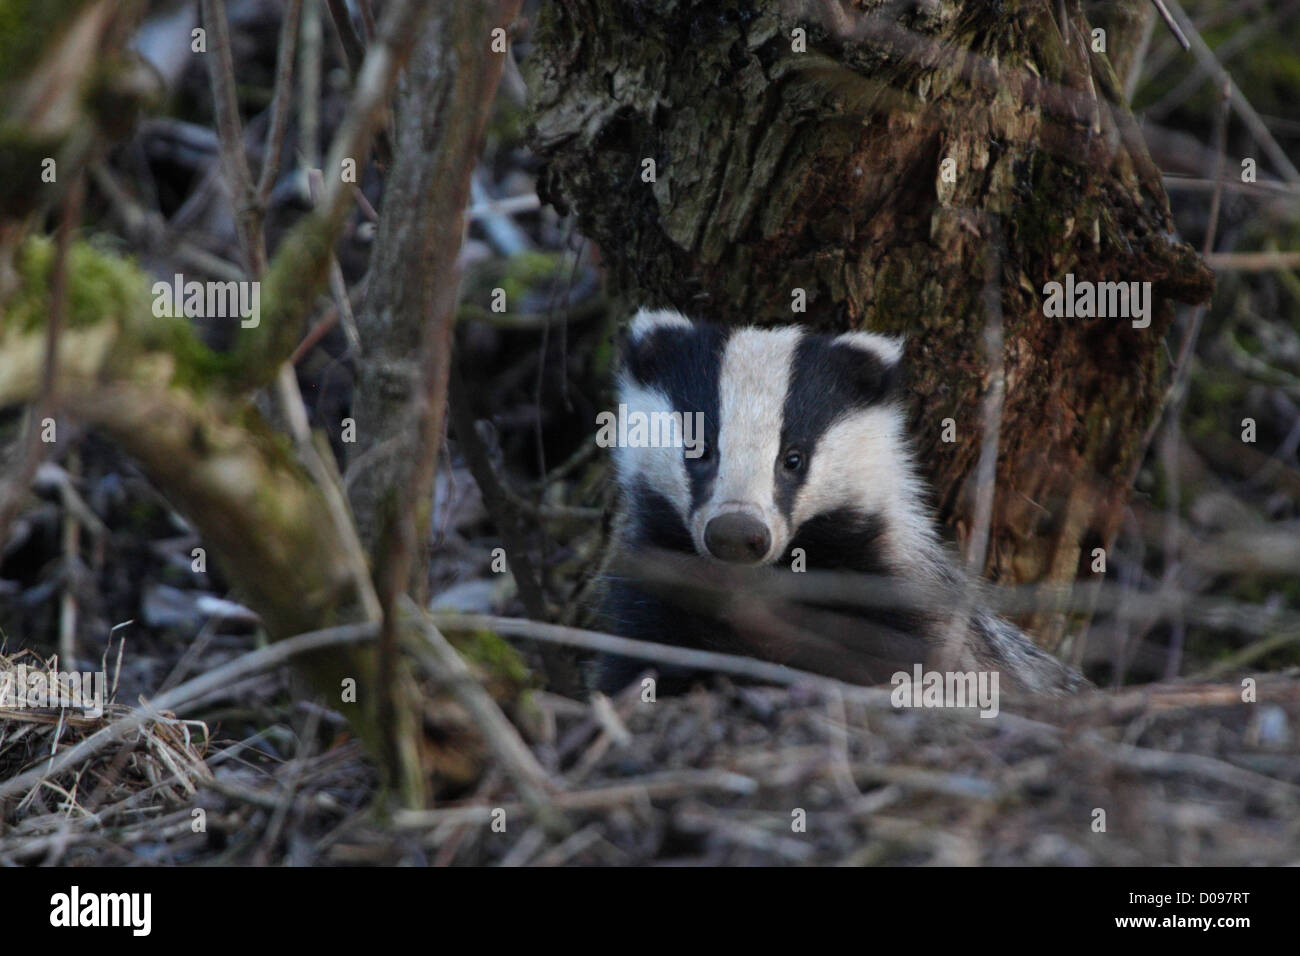 European Badger (Meles meles) looking out from his hole. Europe Stock Photo